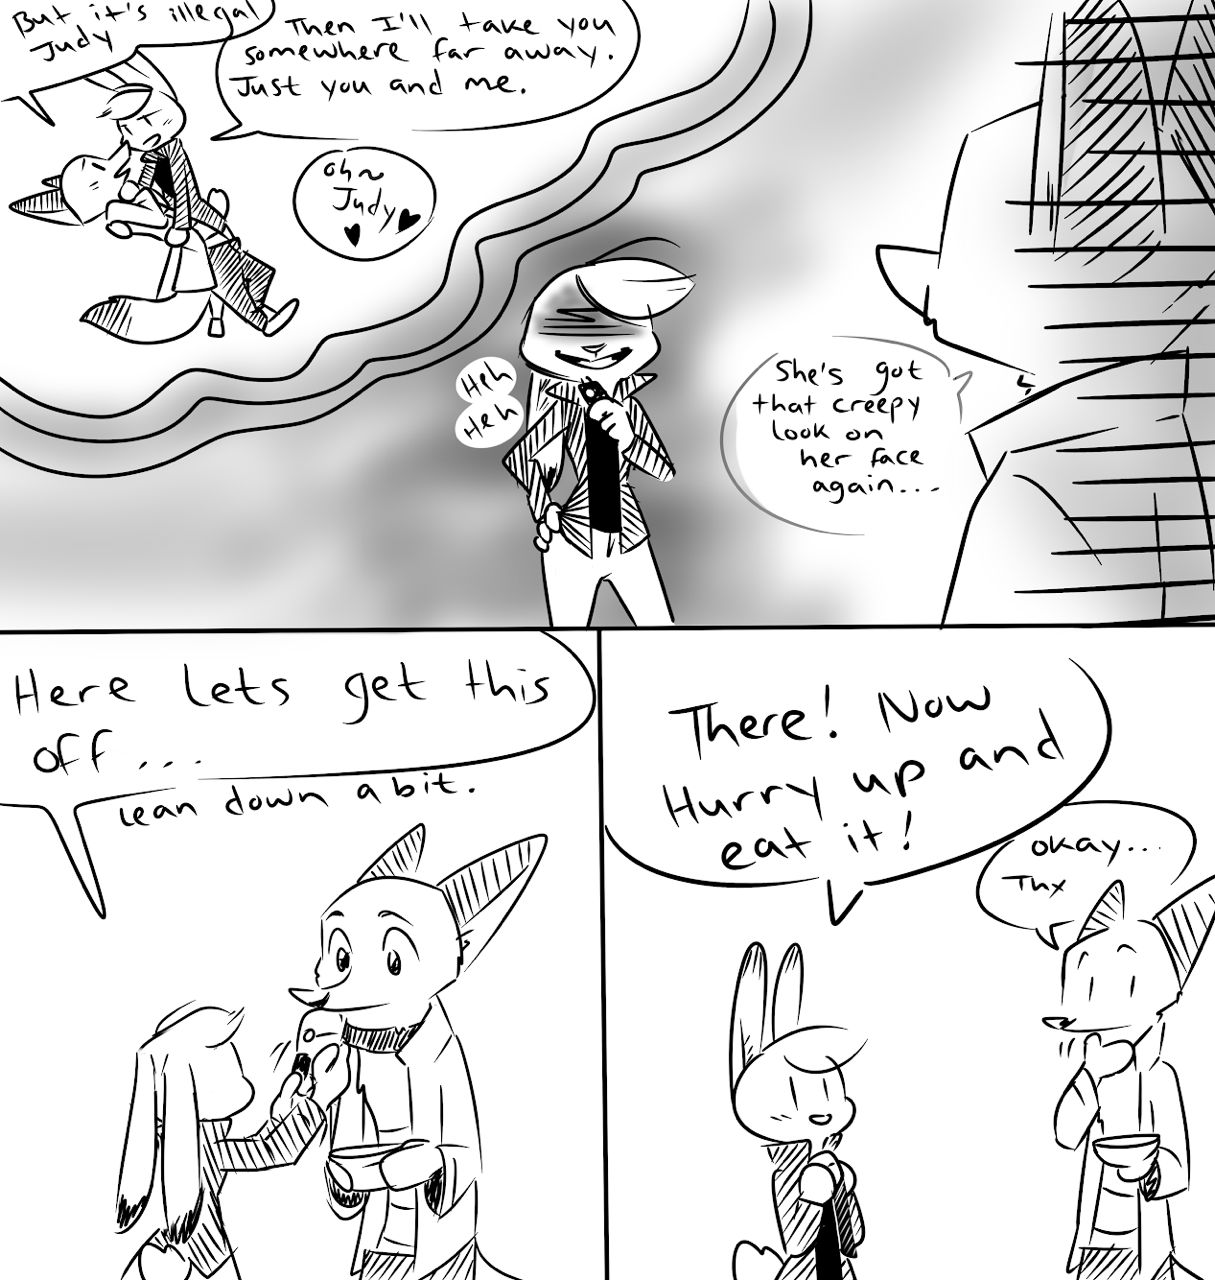 [a-wh-b] Home Cooking (Zootopia) 4